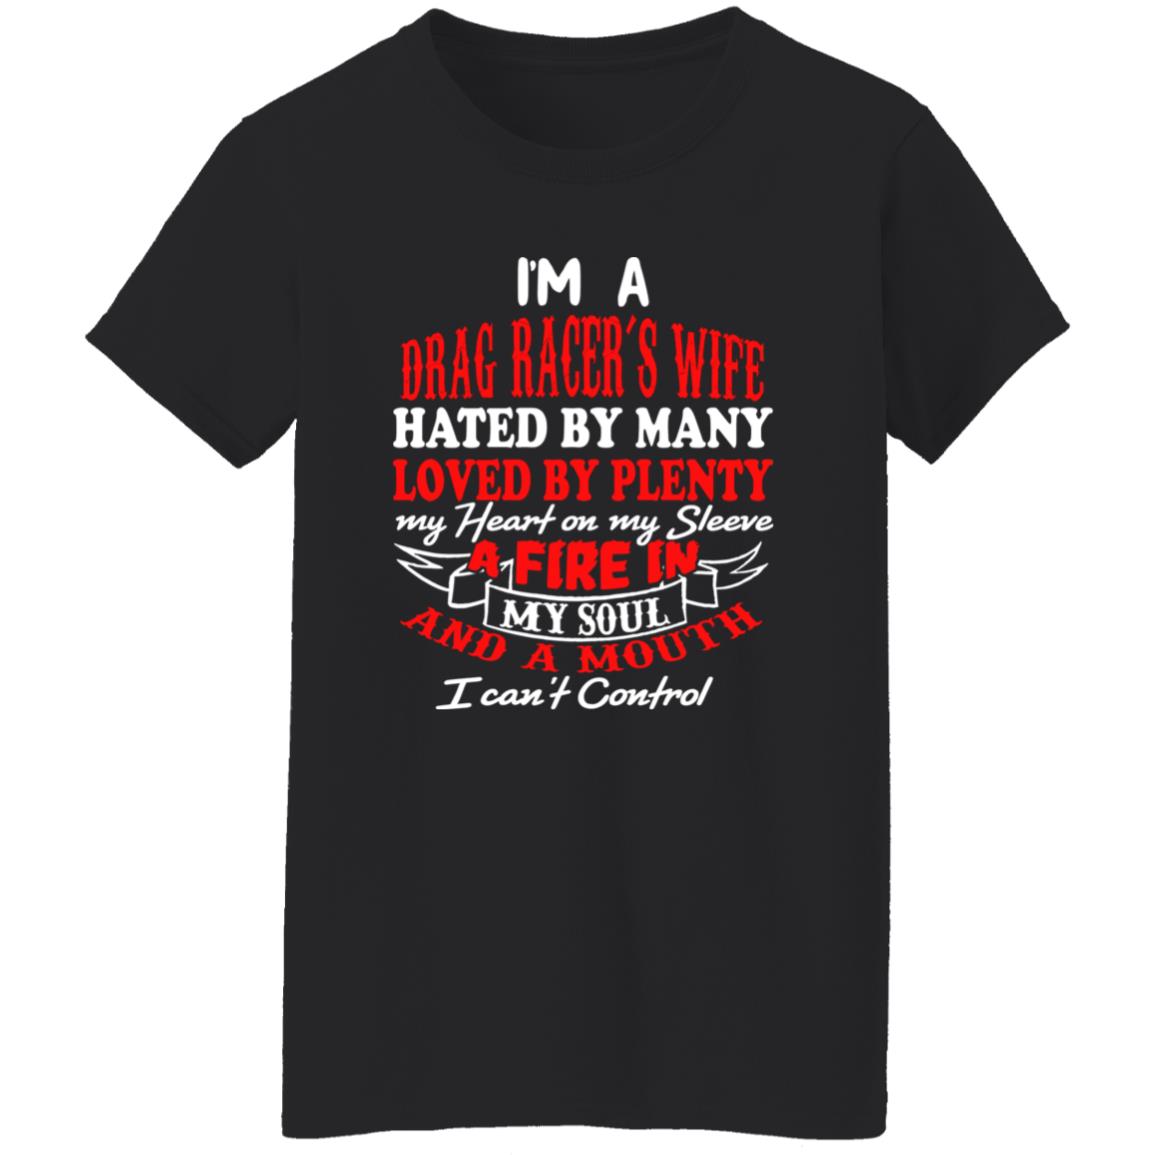 I'm A Drag Racer's Wife Hated By Many Loved By Plenty Ladies' 5.3 oz. T-Shirt